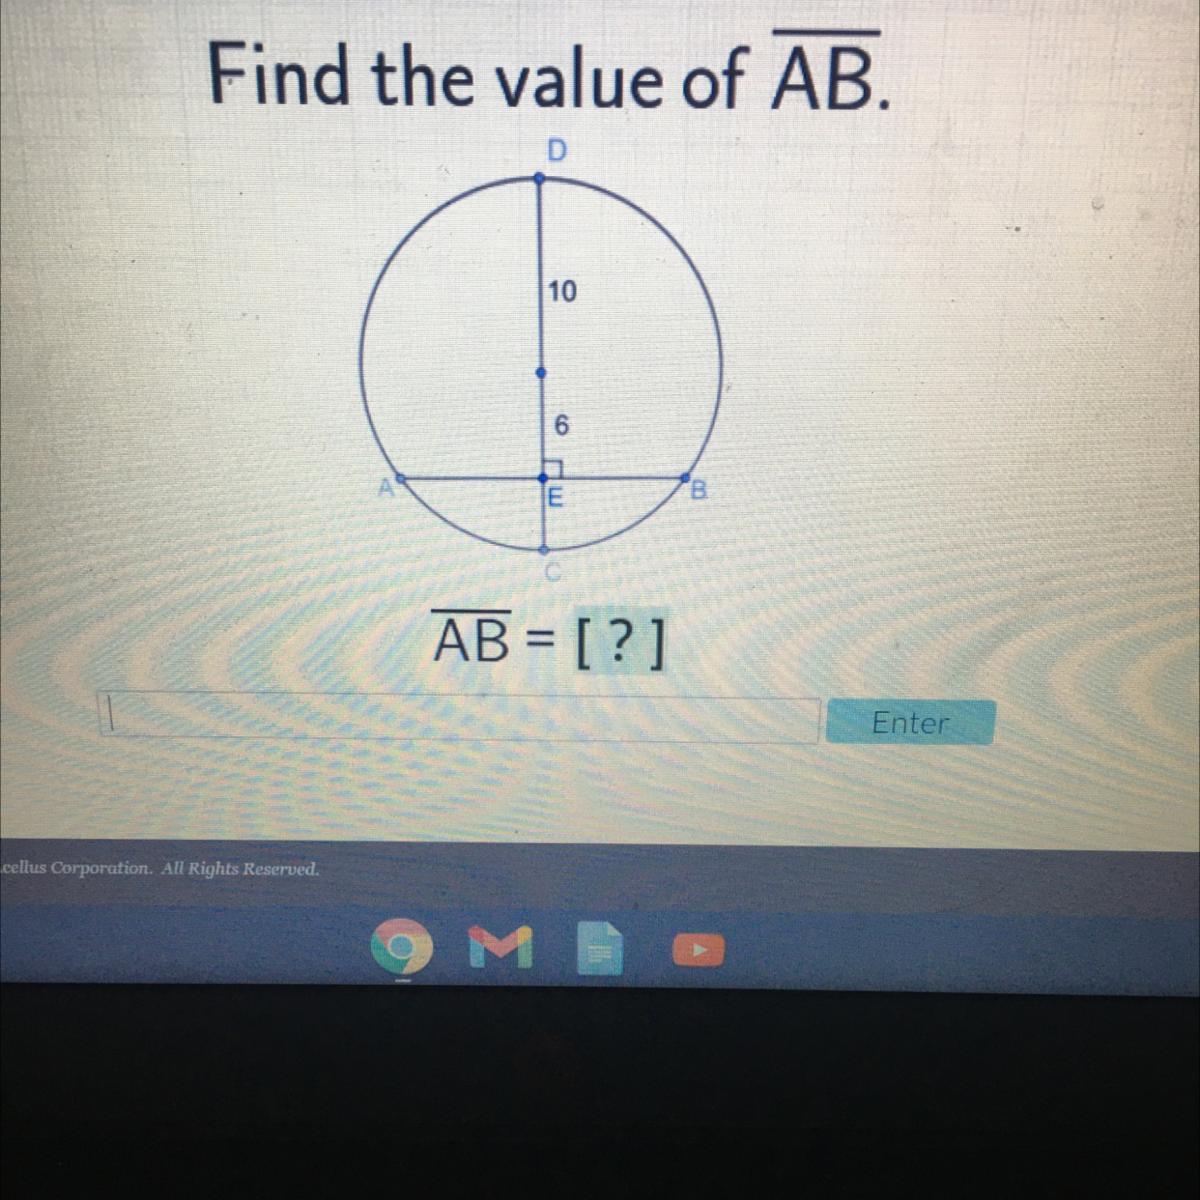 Find The Value Of AB.106AEBAB = [?]